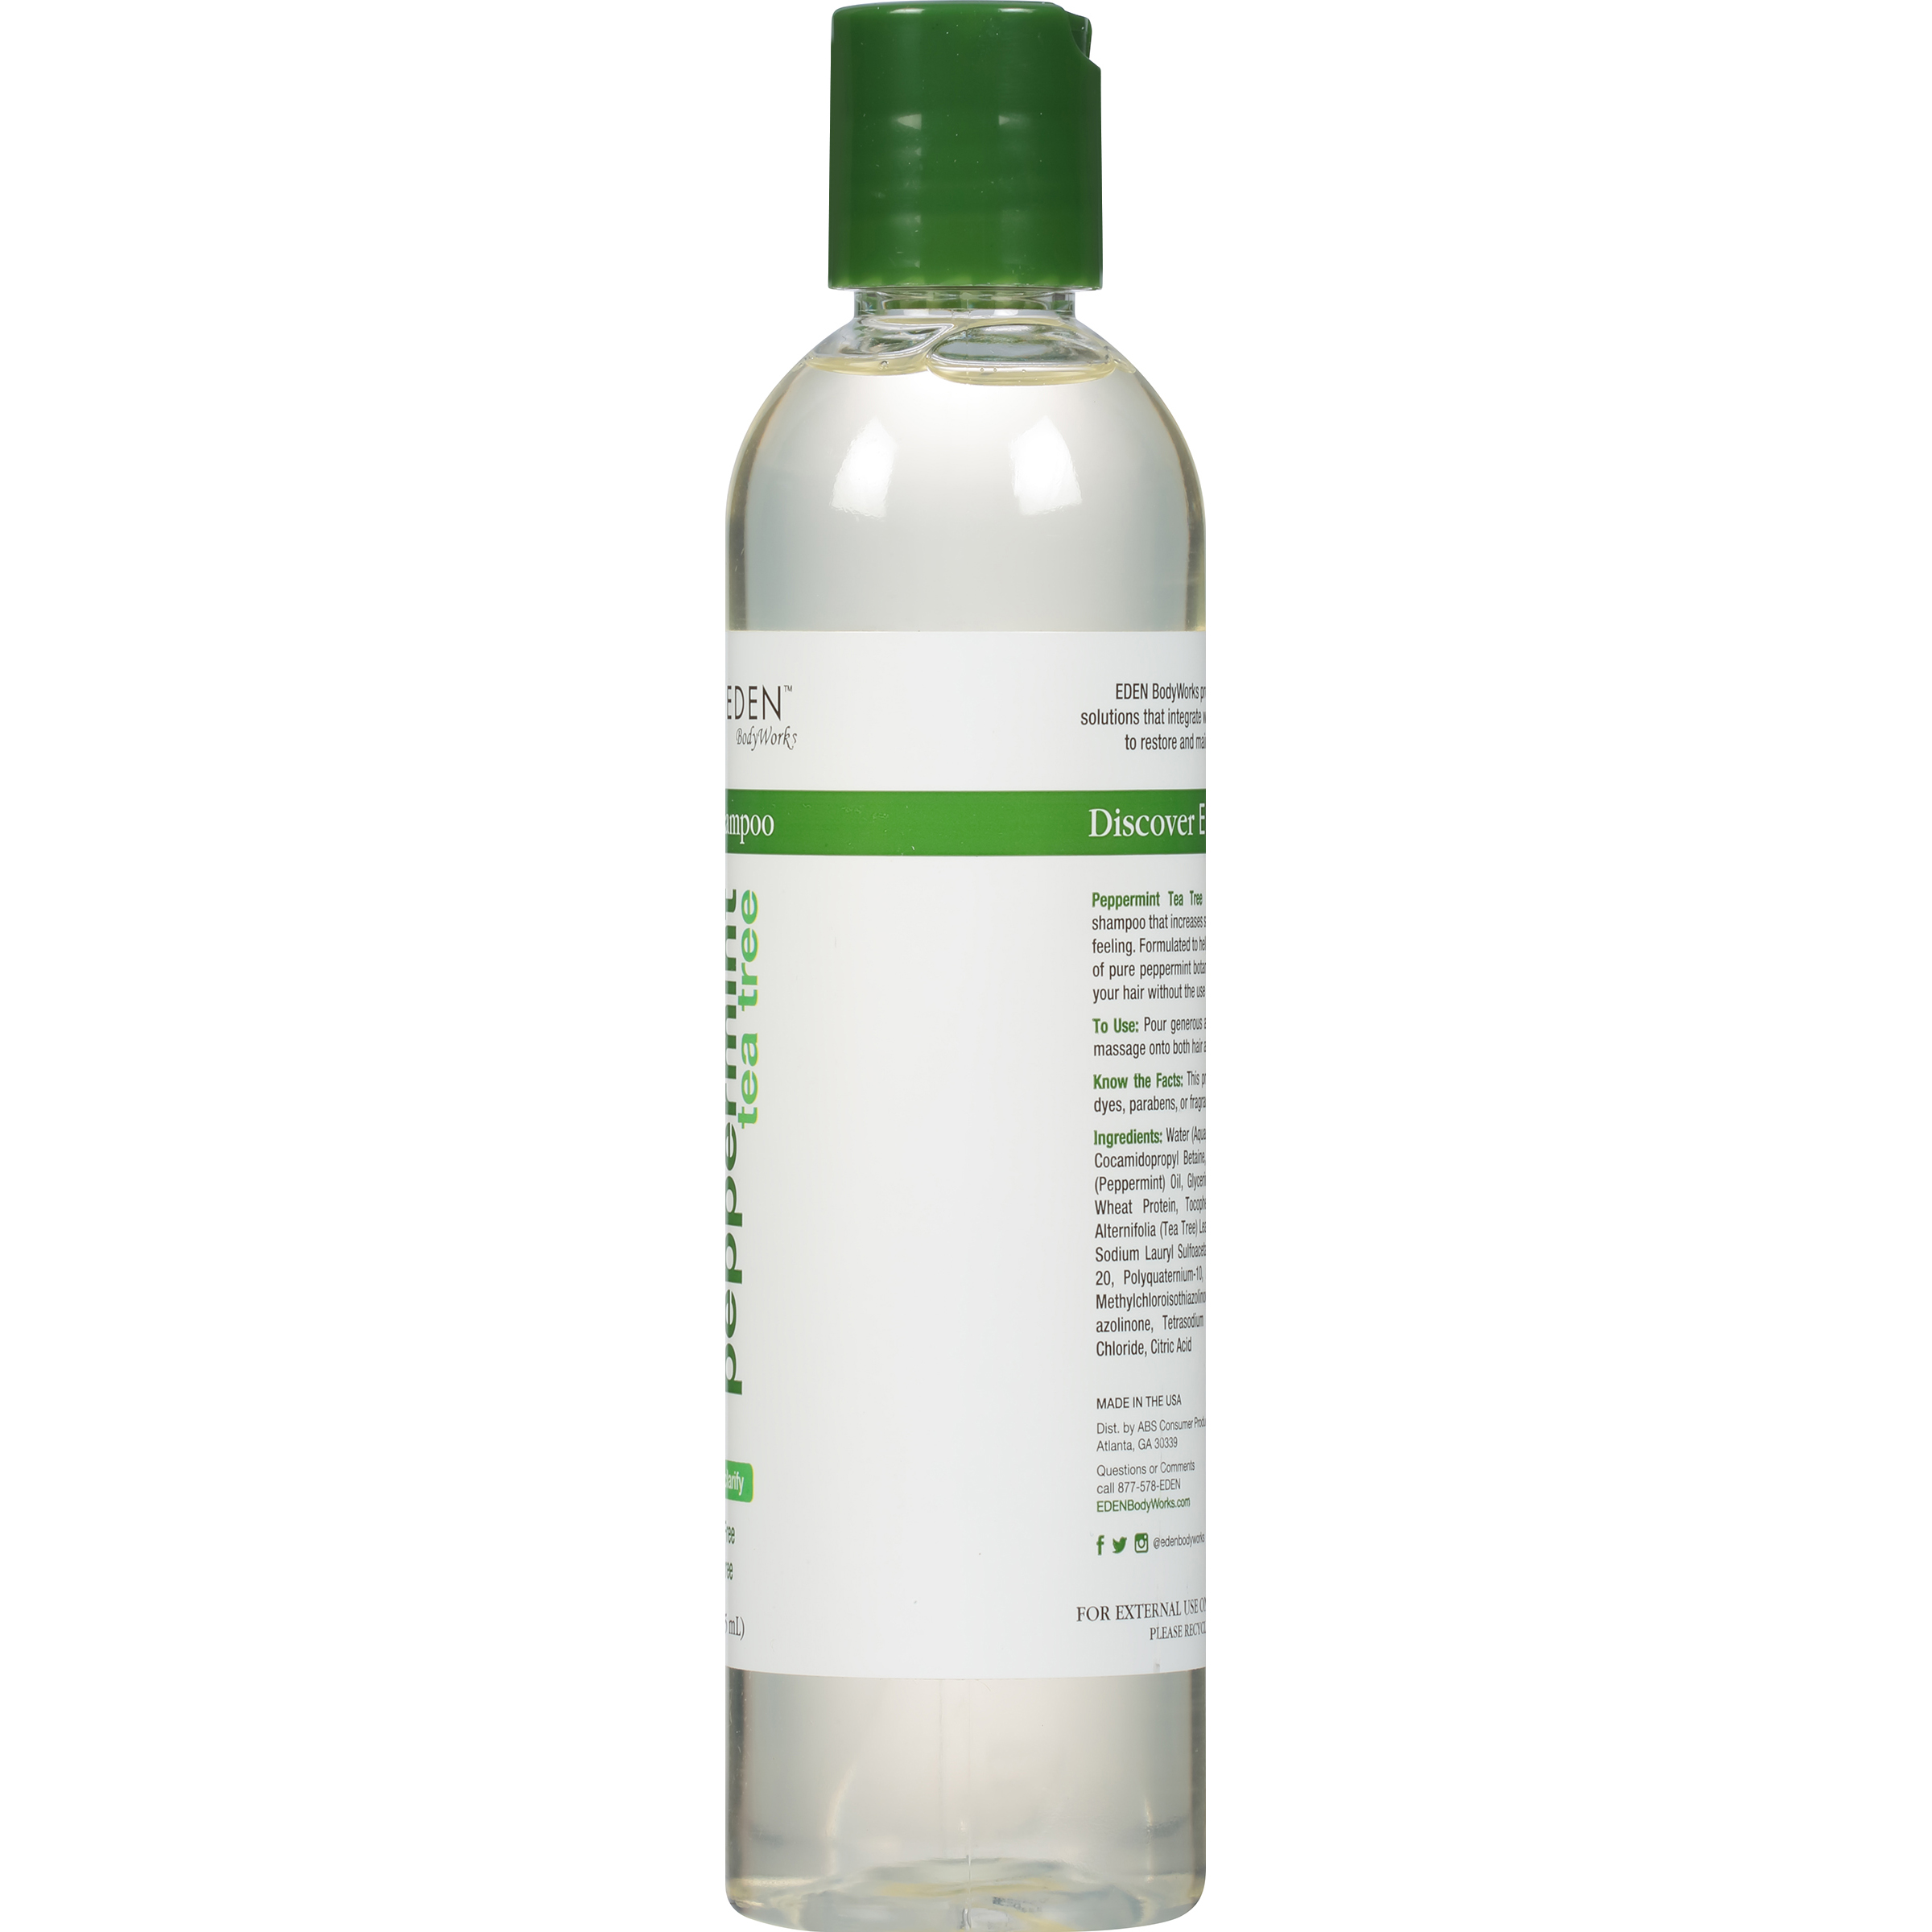 Eden BodyWorks Natural Clarifying Daily Shampoo with Peppermint & Tea Tree, 8 fl oz - image 4 of 7